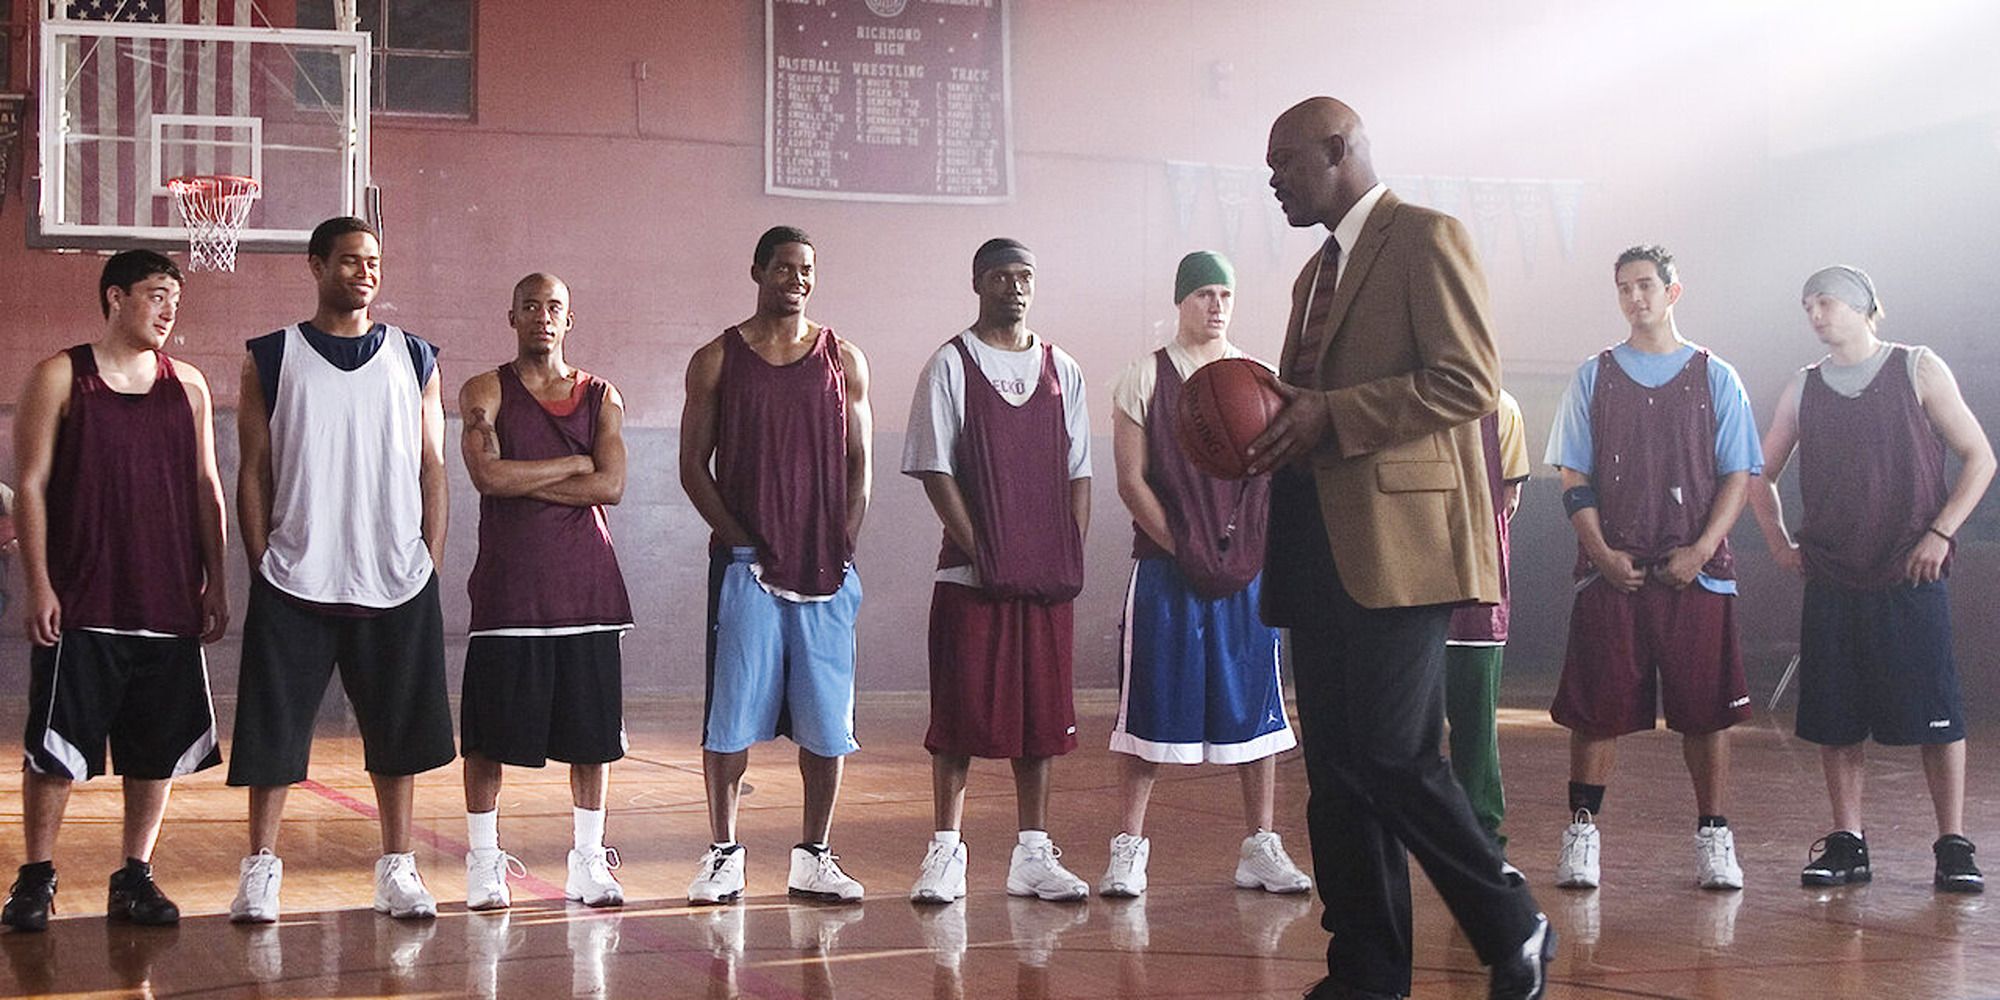 Coach Carter holding a ball, talking to his team on the court